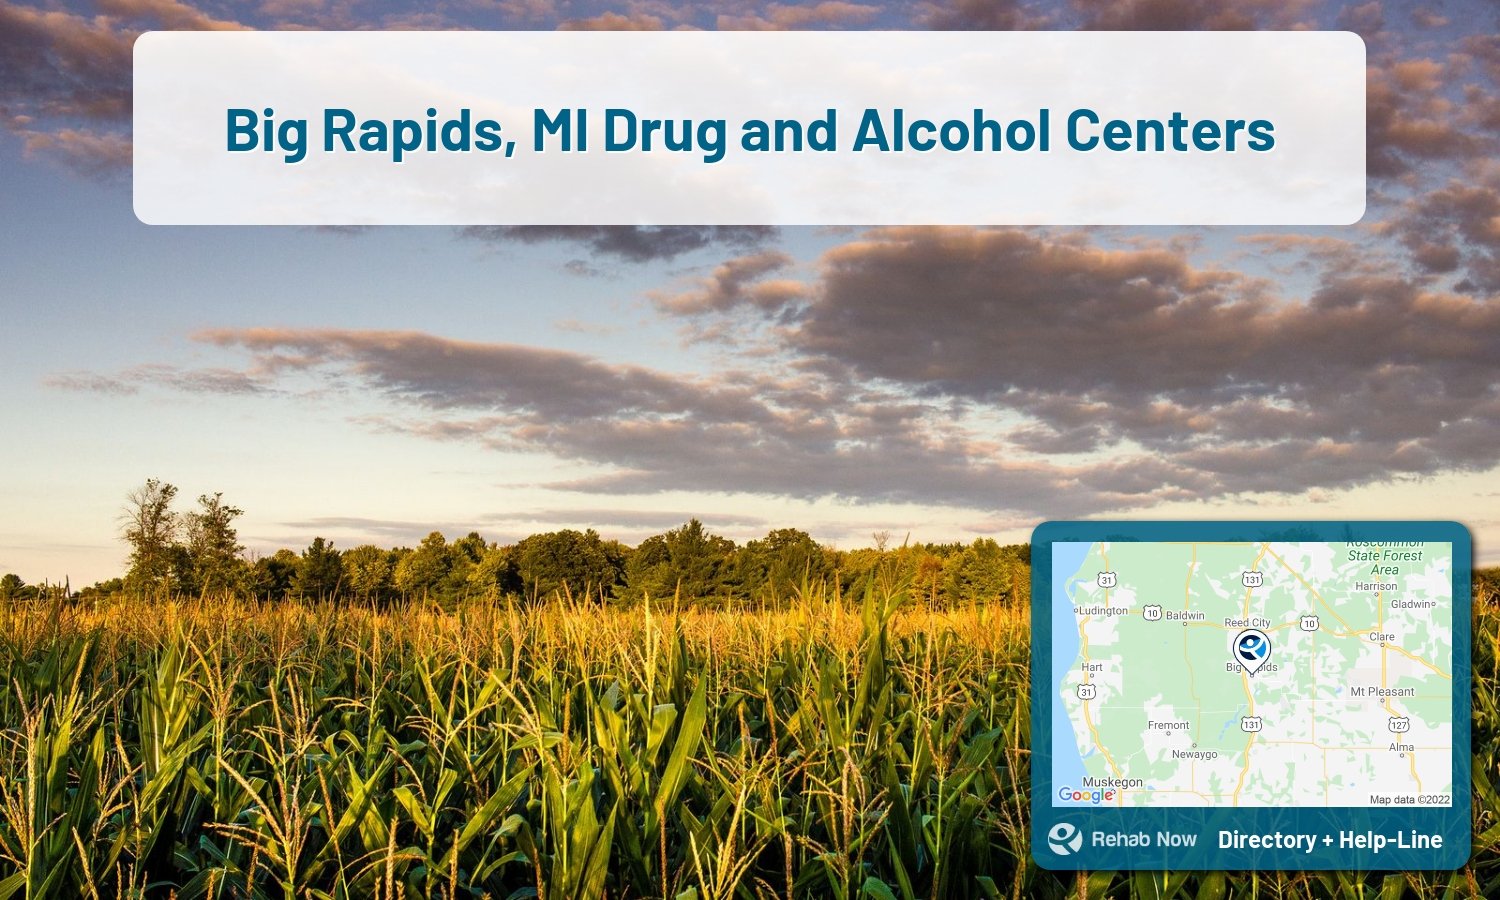 Our experts can help you find treatment now in Big Rapids, Michigan. We list drug rehab and alcohol centers in Michigan.